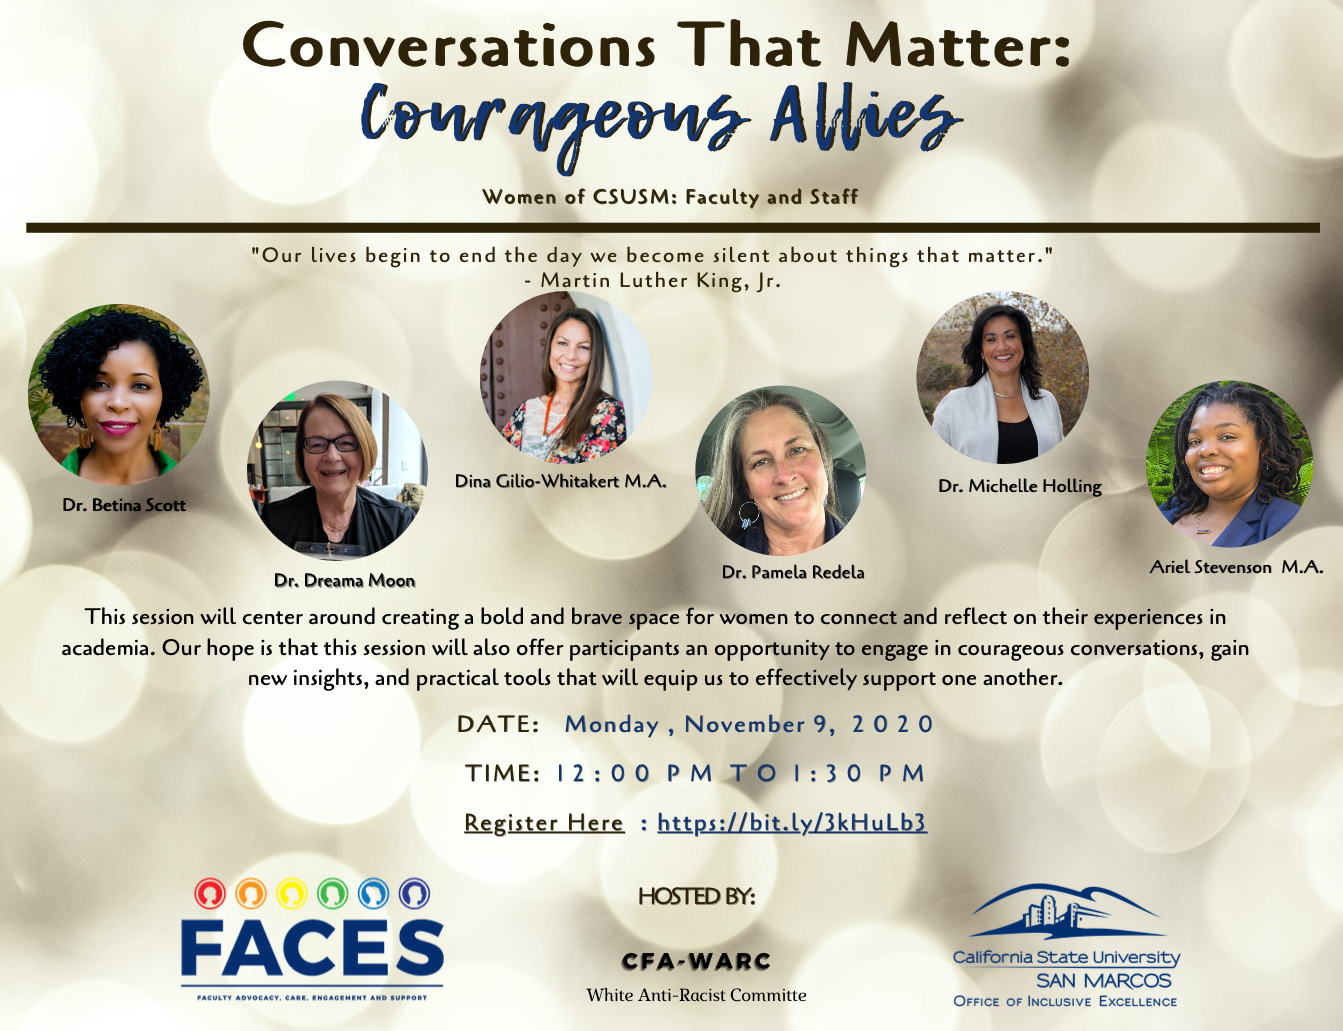 Conversations That Matter: Courageous Allies, Women of CSUSM- Faculty and Staff